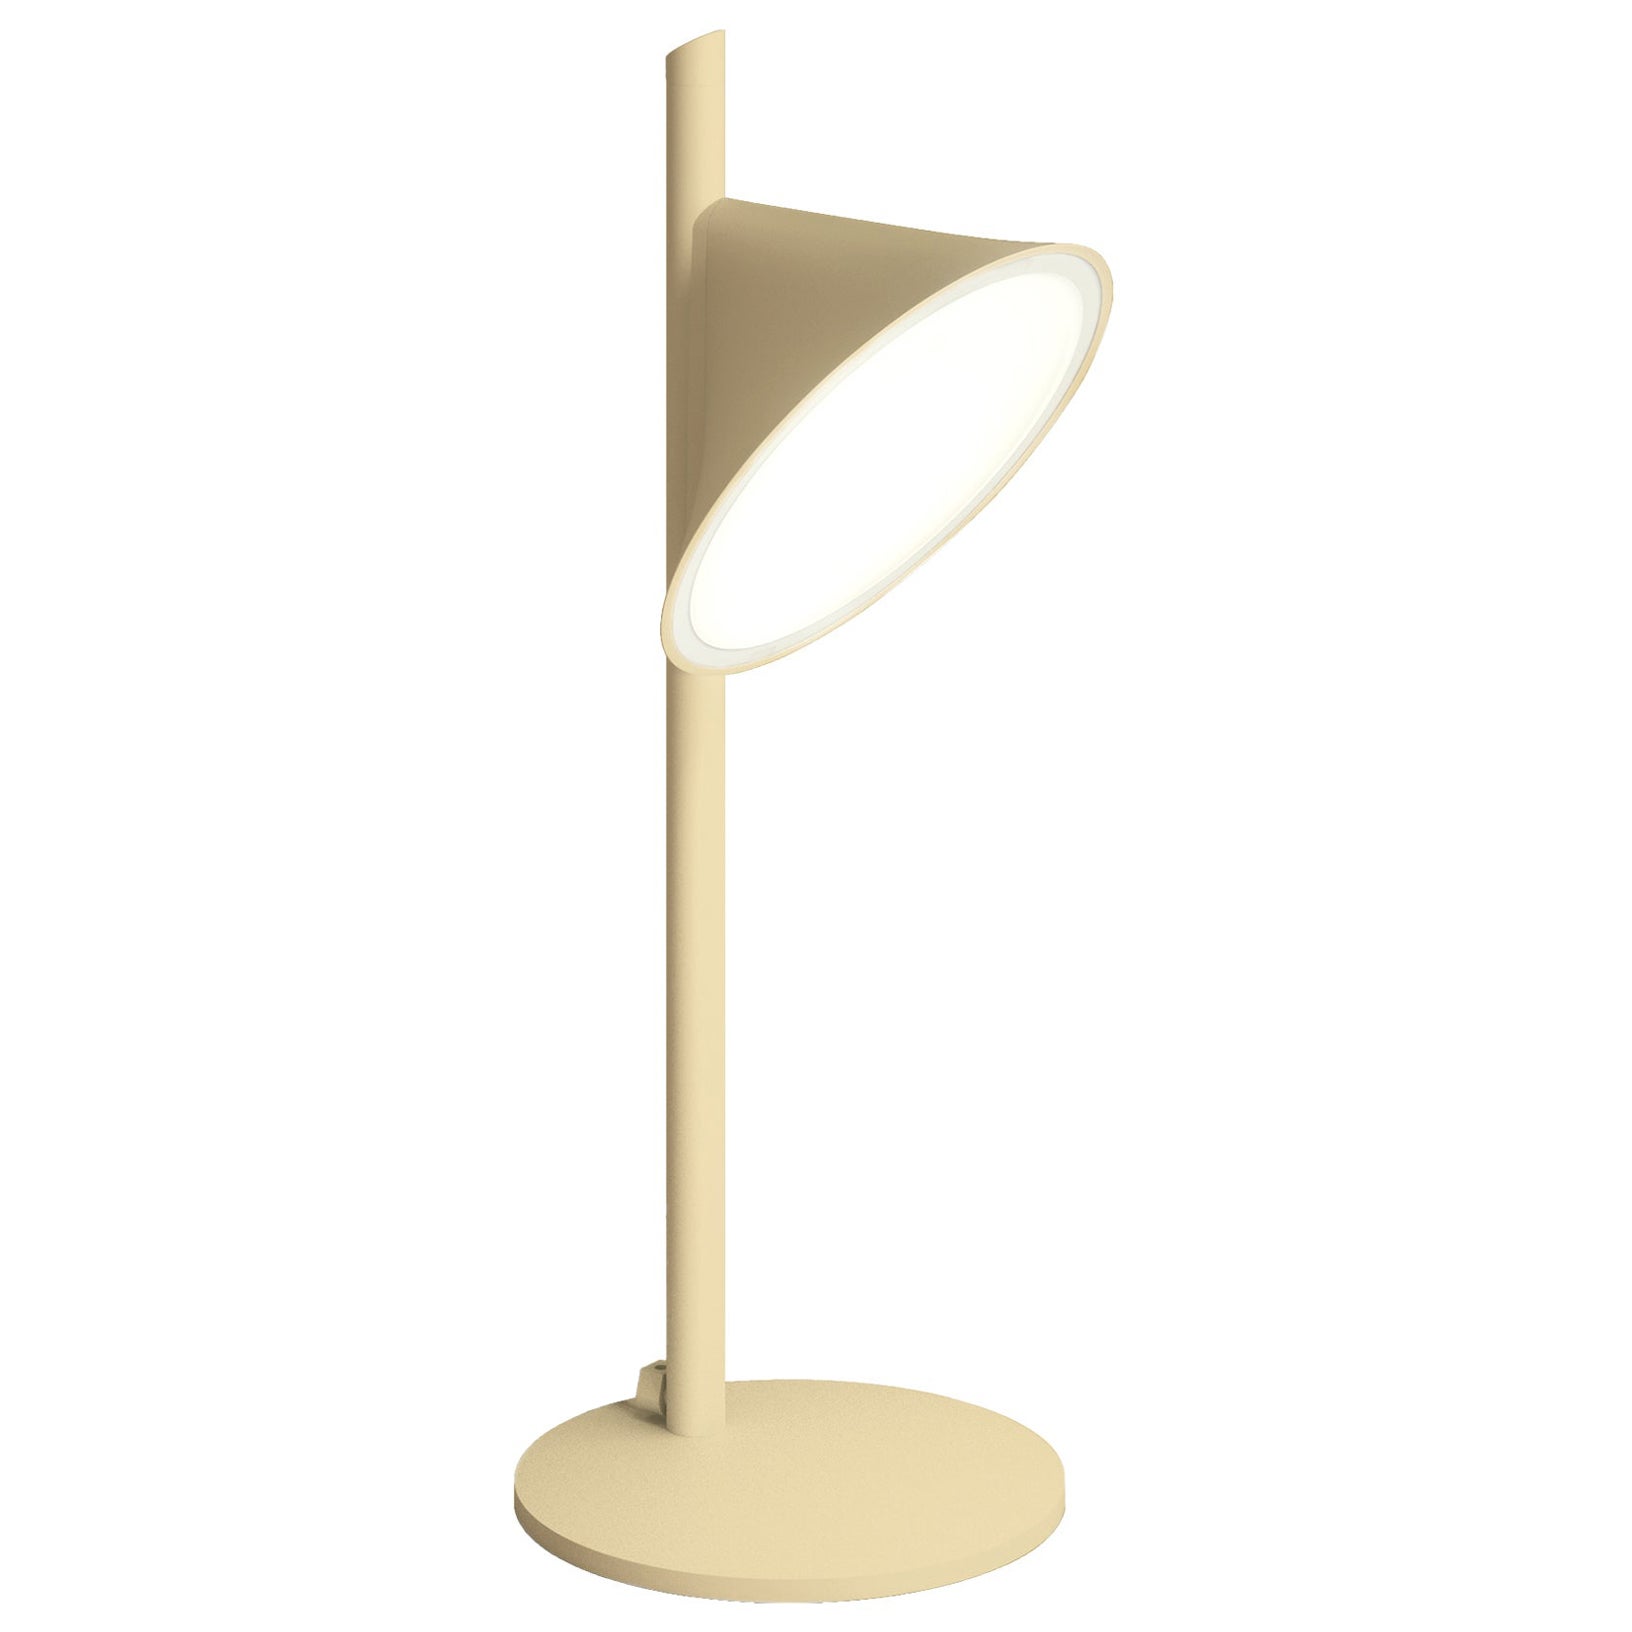 Axolight Orchid Table Lamp with Aluminum Body in Sand by Rainer Mutsch